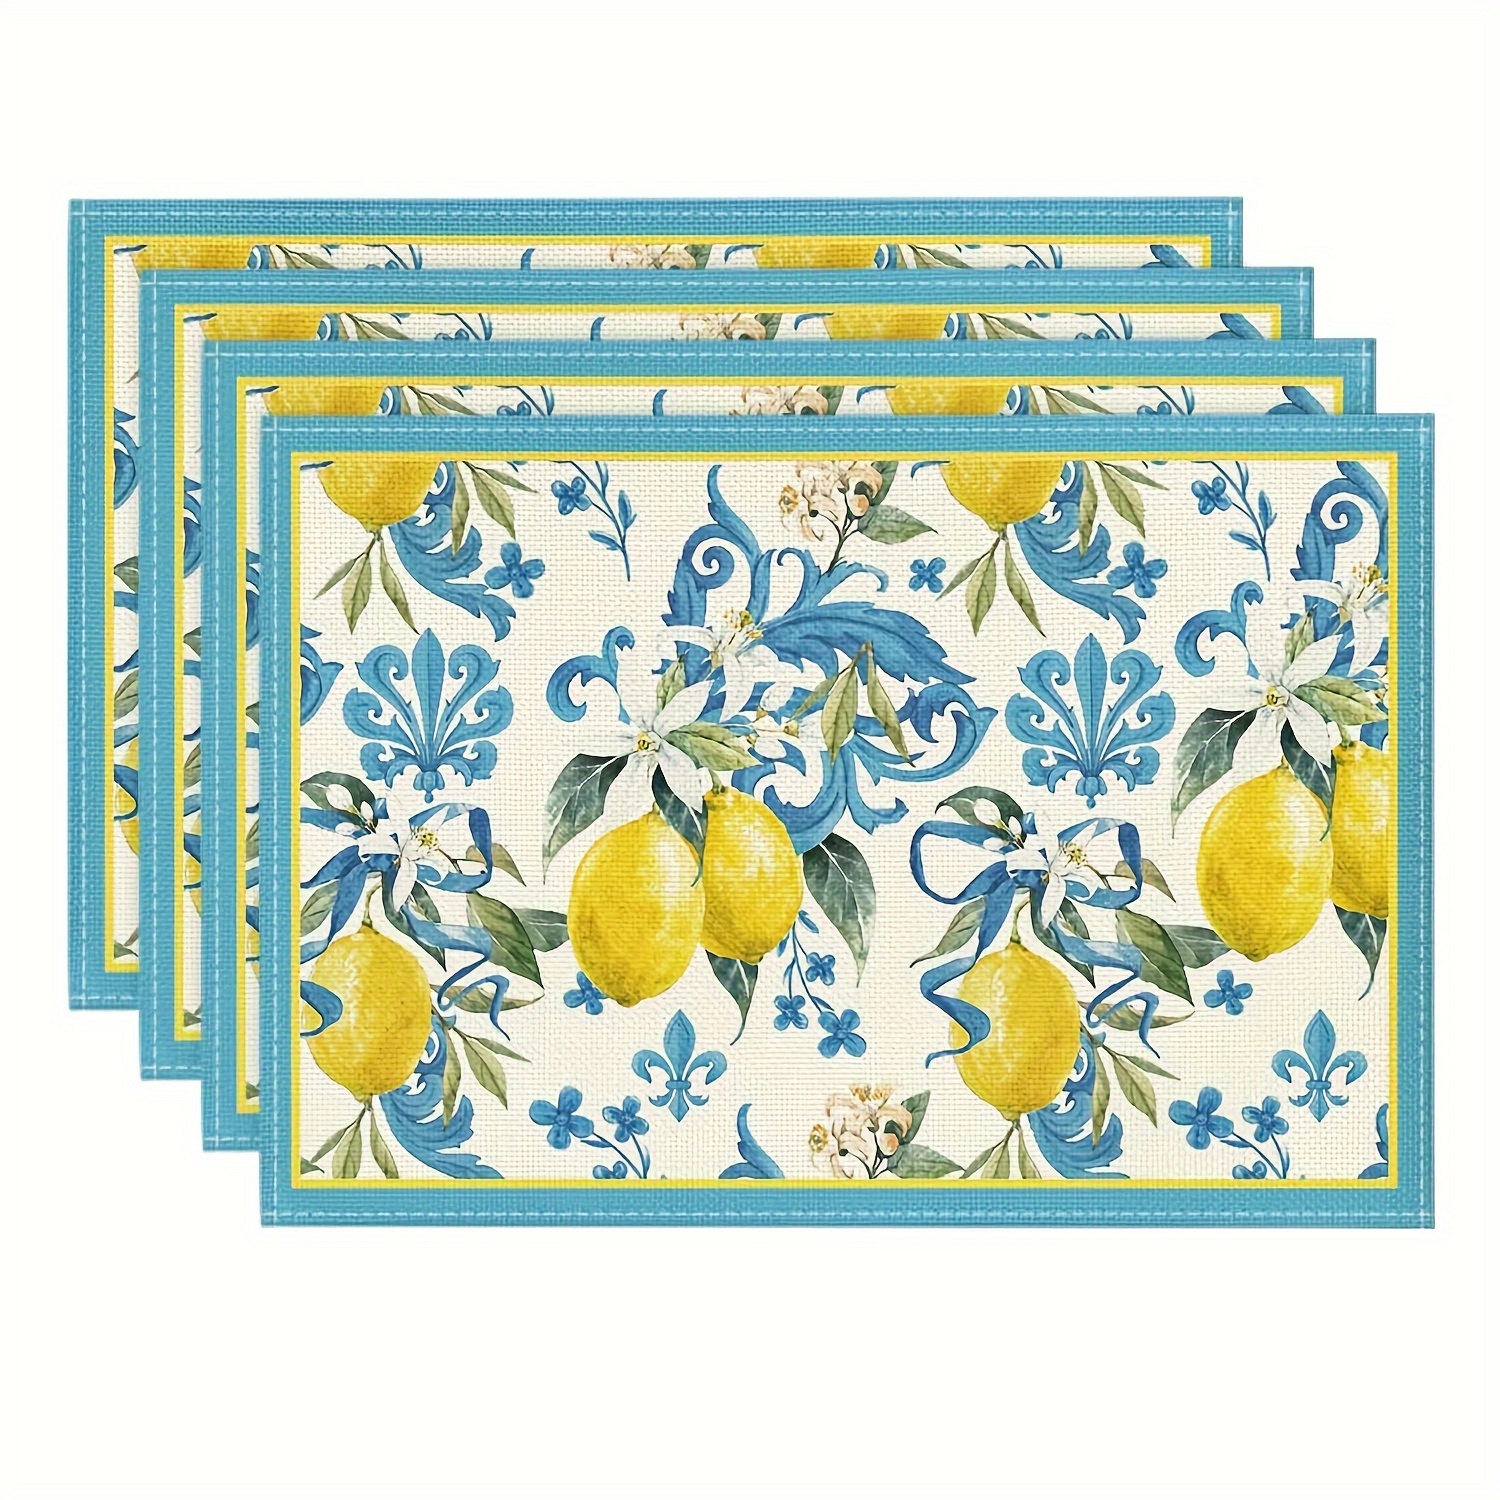 

4pcs, Placemats, Fresh Lemon Pattern Decorative Table Pads, Seasonal Farmhouse Table Decor, Perfect For Home, Party, Dining Room & Kitchen Use